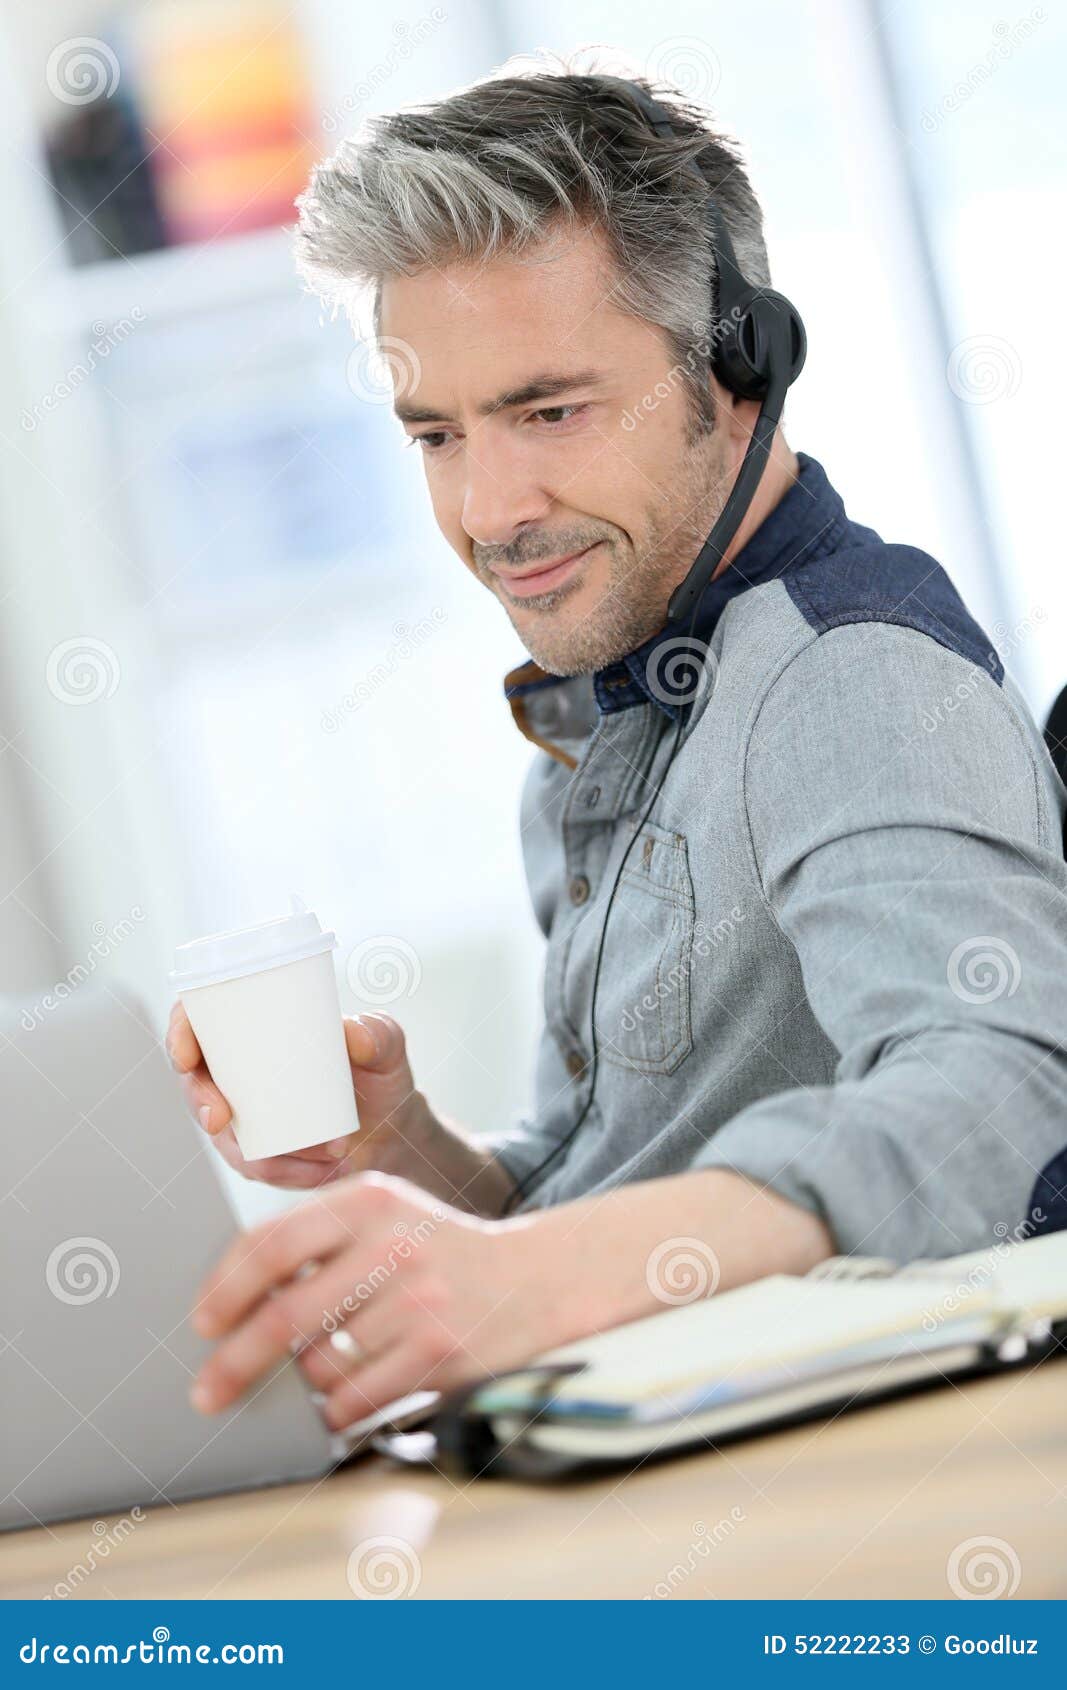 mature man teleworking and drinking coffee